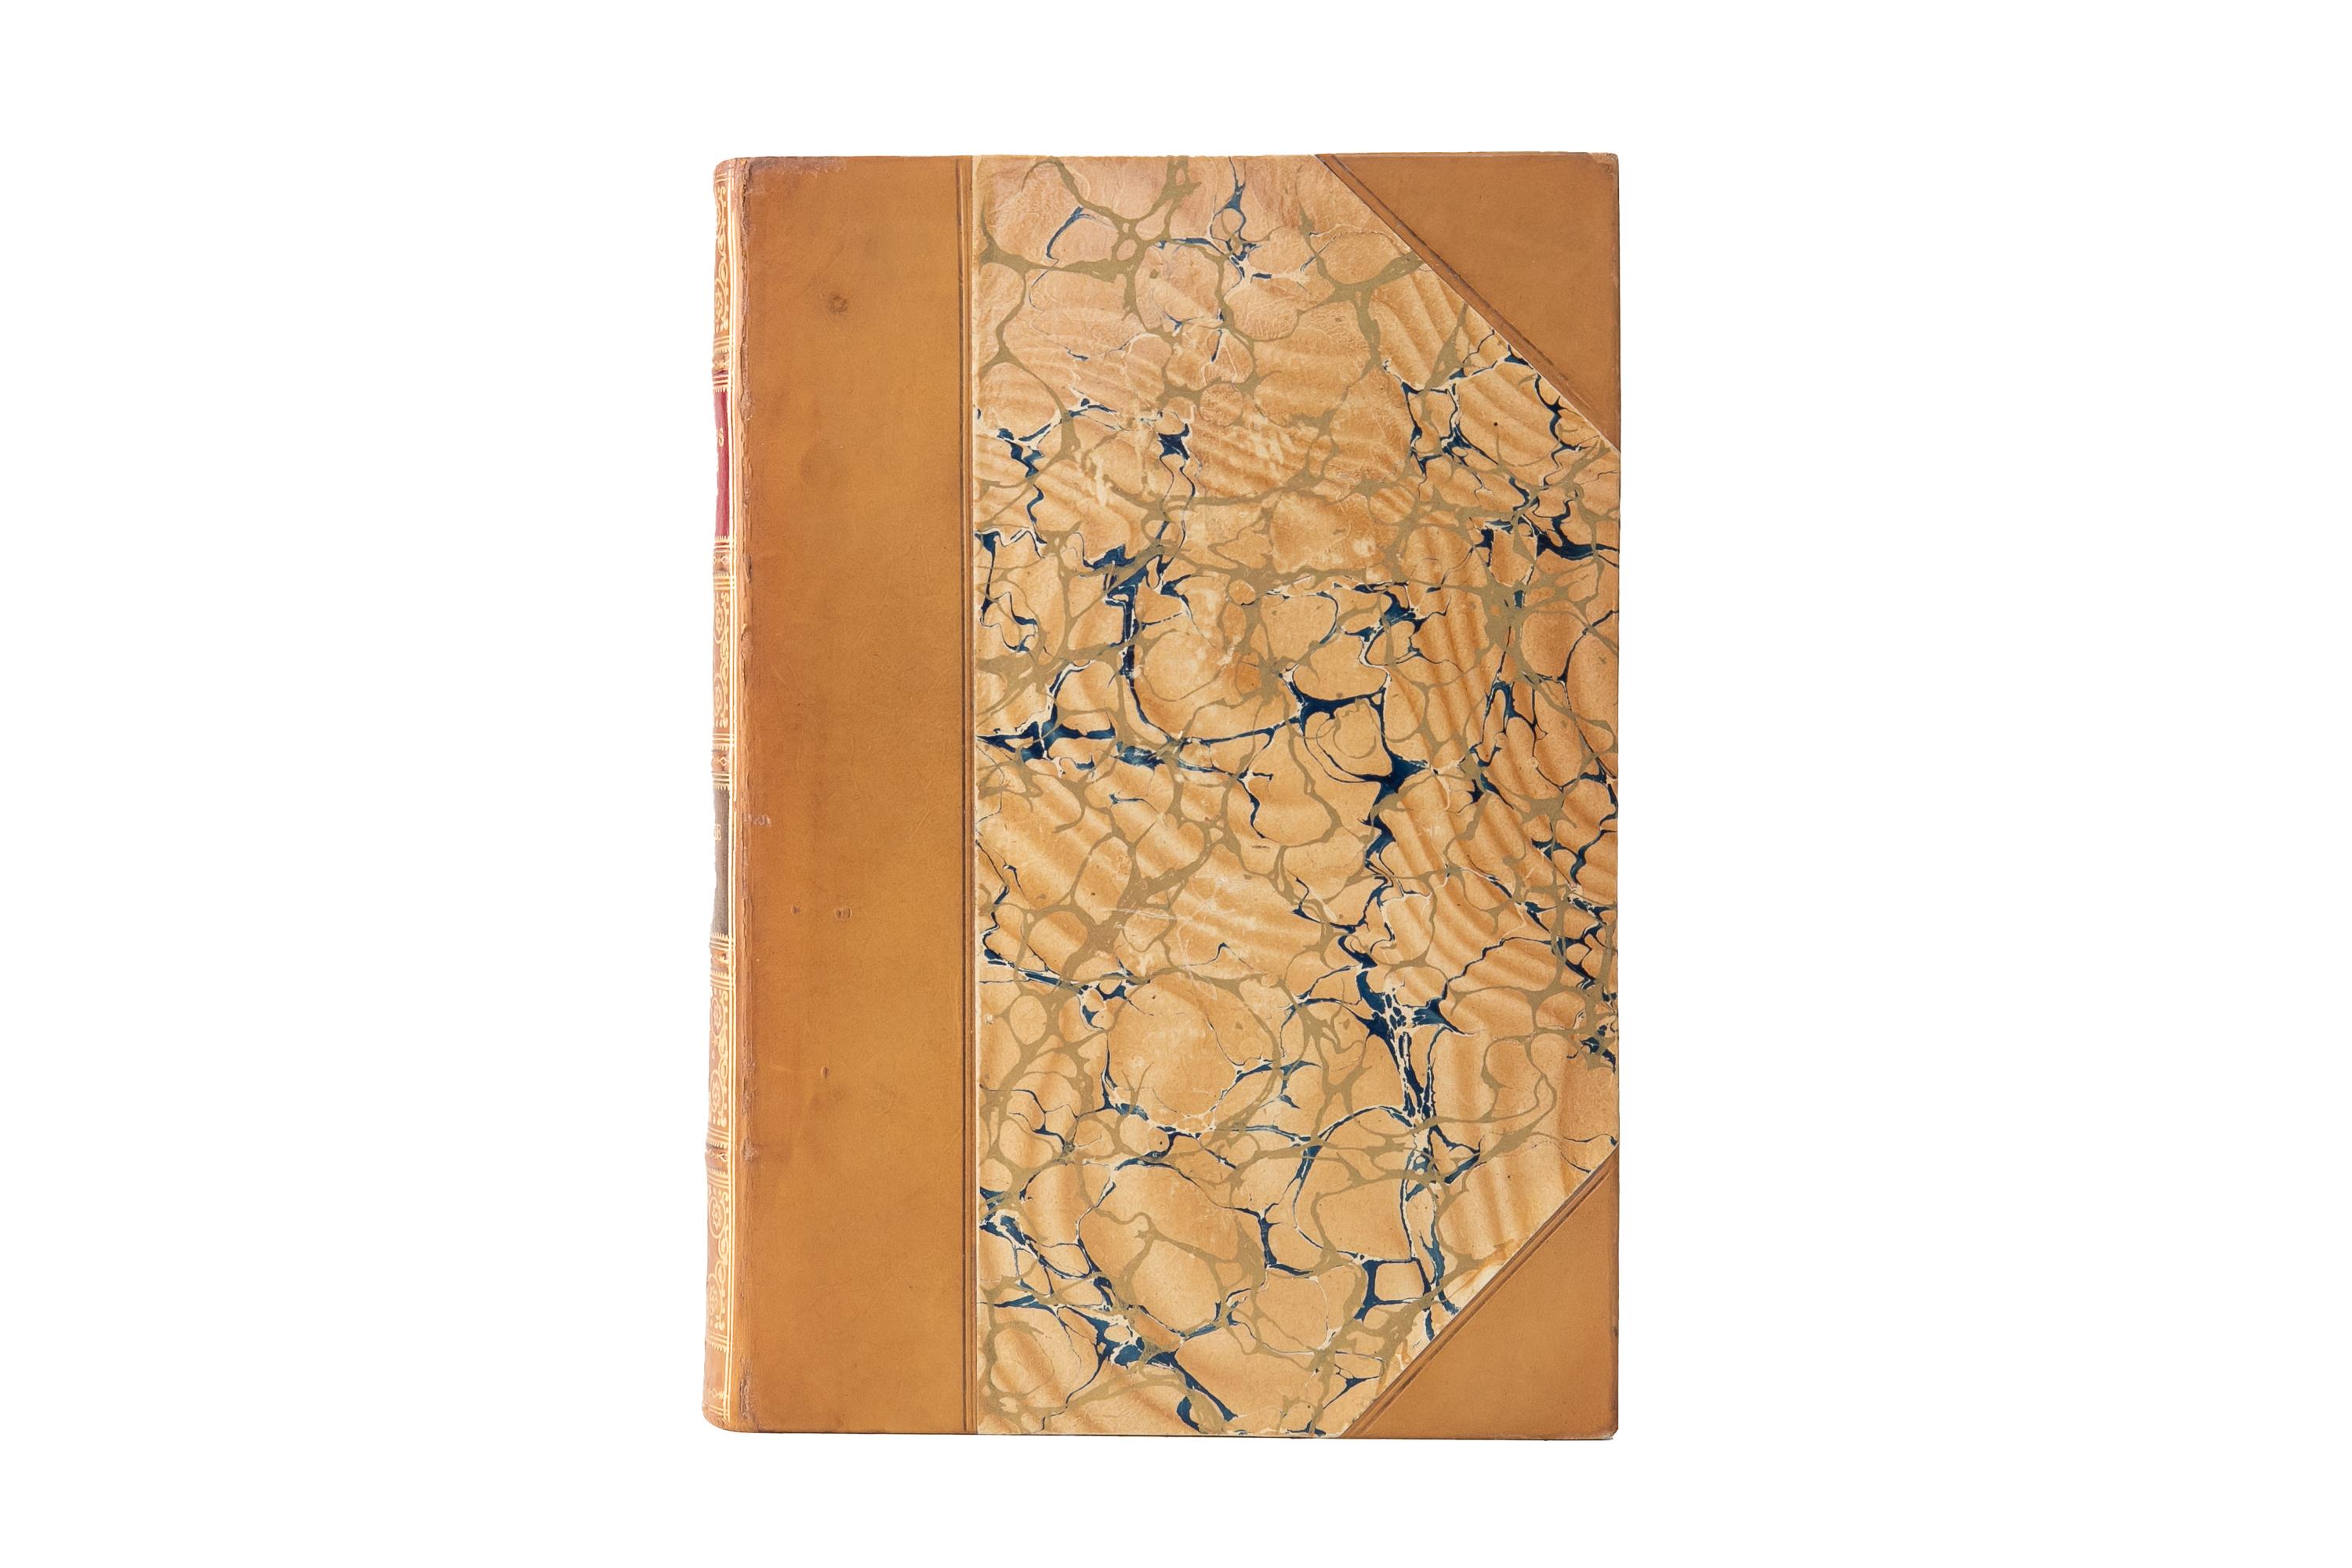 1 Volume. Elizabeth Barrett Browning, The Poetical Works. Cambridge Edition. Bound in 3/4 tan calf and marbled boards. Raised band spine gilt-tooled with red and green morocco labels. The top edge is gilt with marbled endpapers. Includes